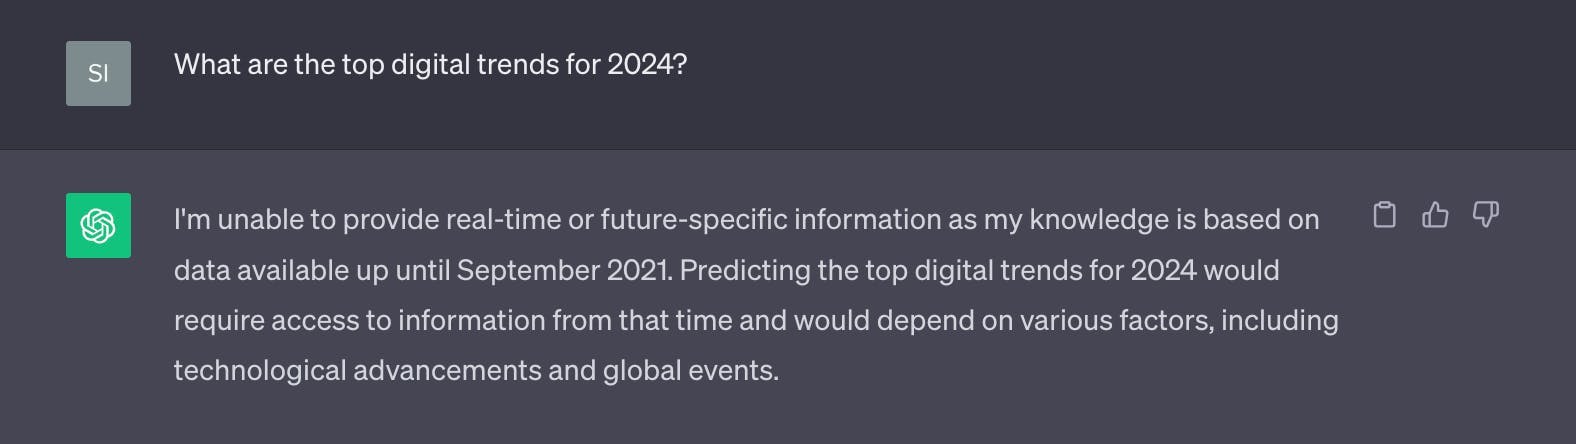 ChatGPT Screenshot: What are the top digital trends for 2024